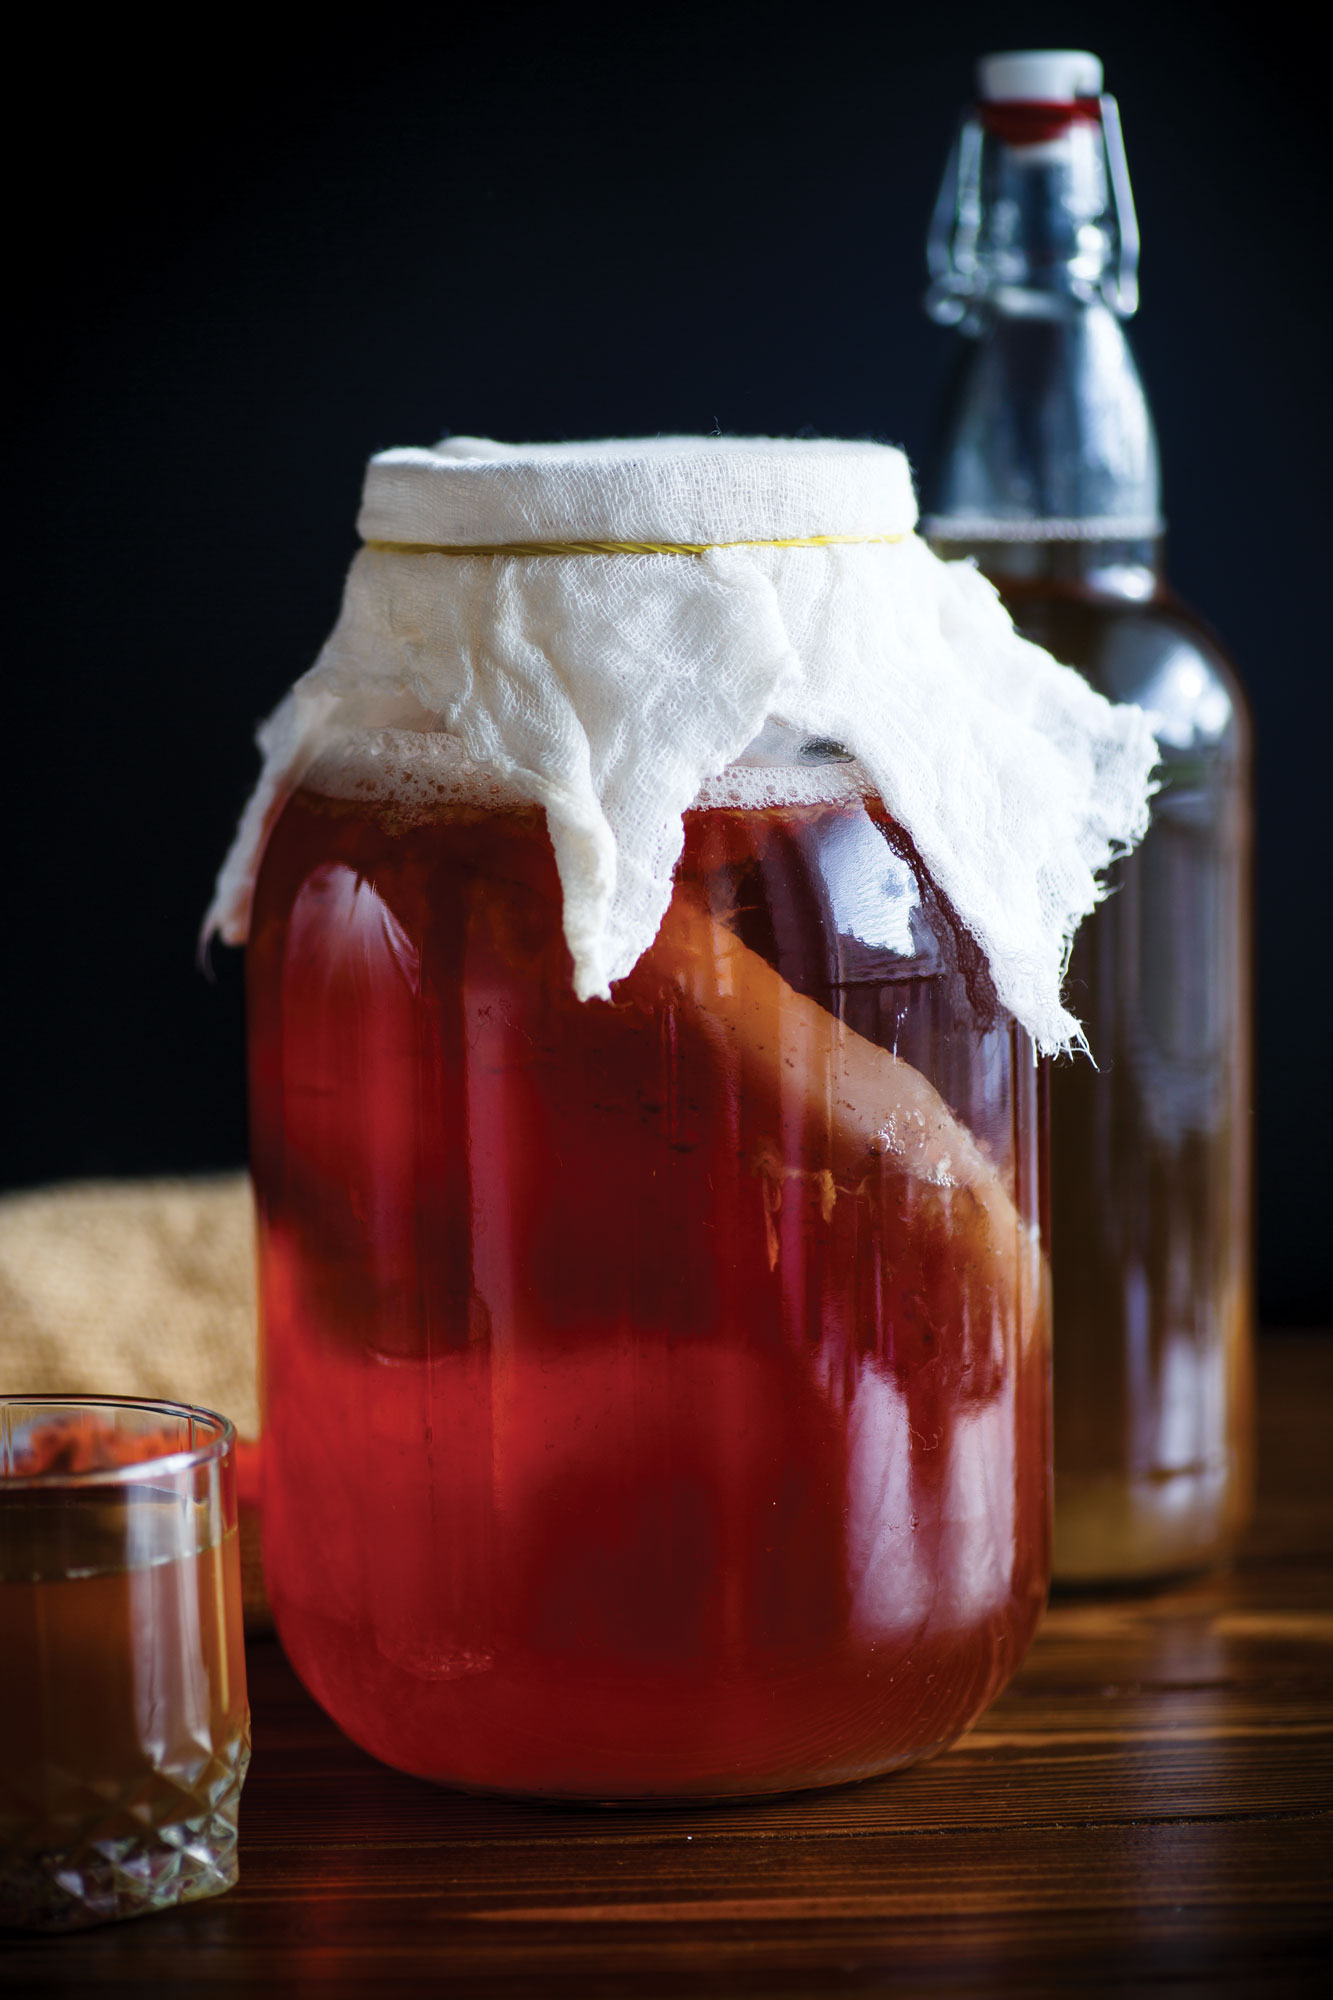 A jar of kombucha fermenting with a bottle in the background